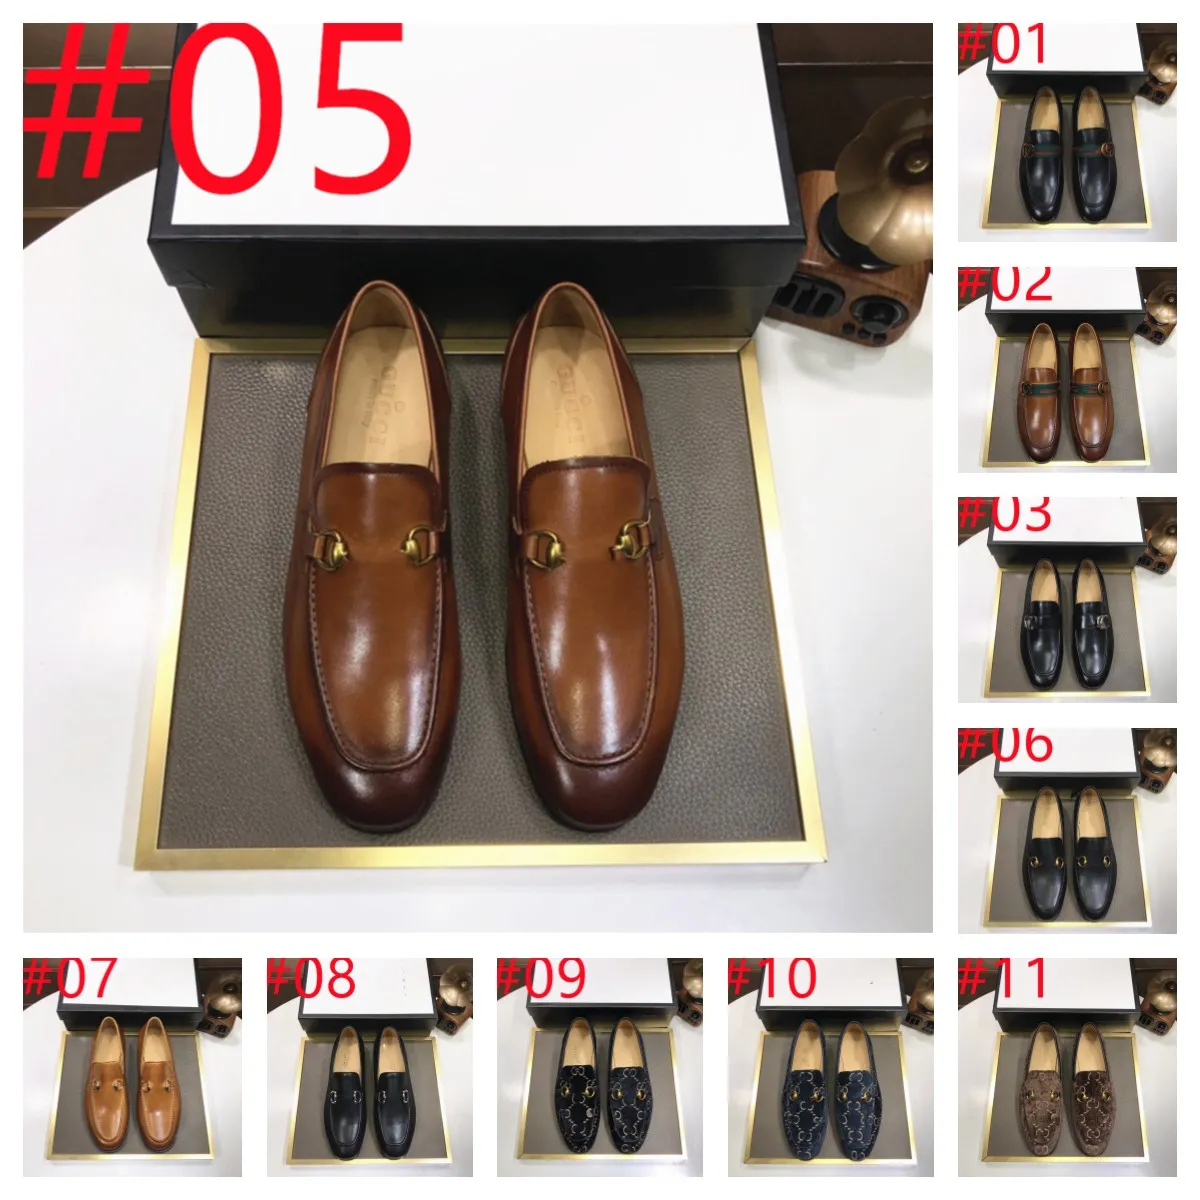 63 Modelluxurious Italian Men Dress Shoes Oxford Genuine Leather Moccasins Brown Black Men Designer Loafers Shoes Men Classic High Quality Wedding Size 38-46